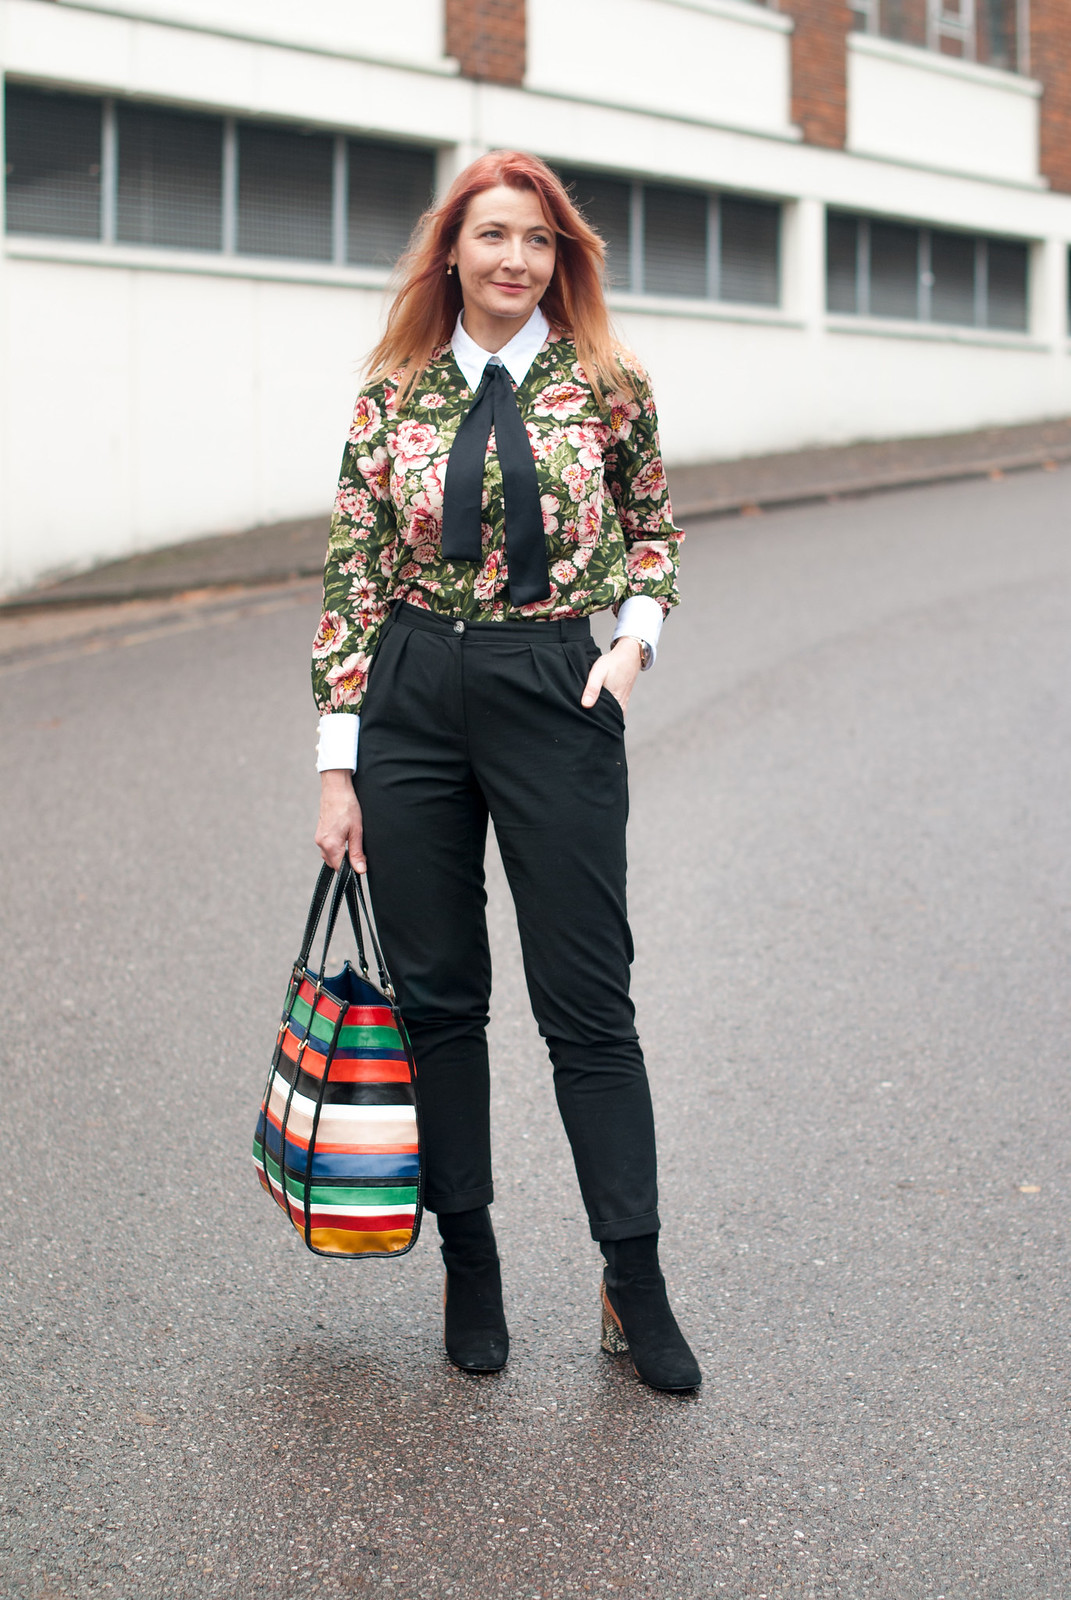 A masculine/feminine floral blouse with contrasting cuffs and black neck tie \ with black peg leg tapered trousers pants \ Finery two tone suede and leopard ankle boots \ multi-coloured striped Mango shopper bag | Not Dressed As Lamb, over 40 fashion